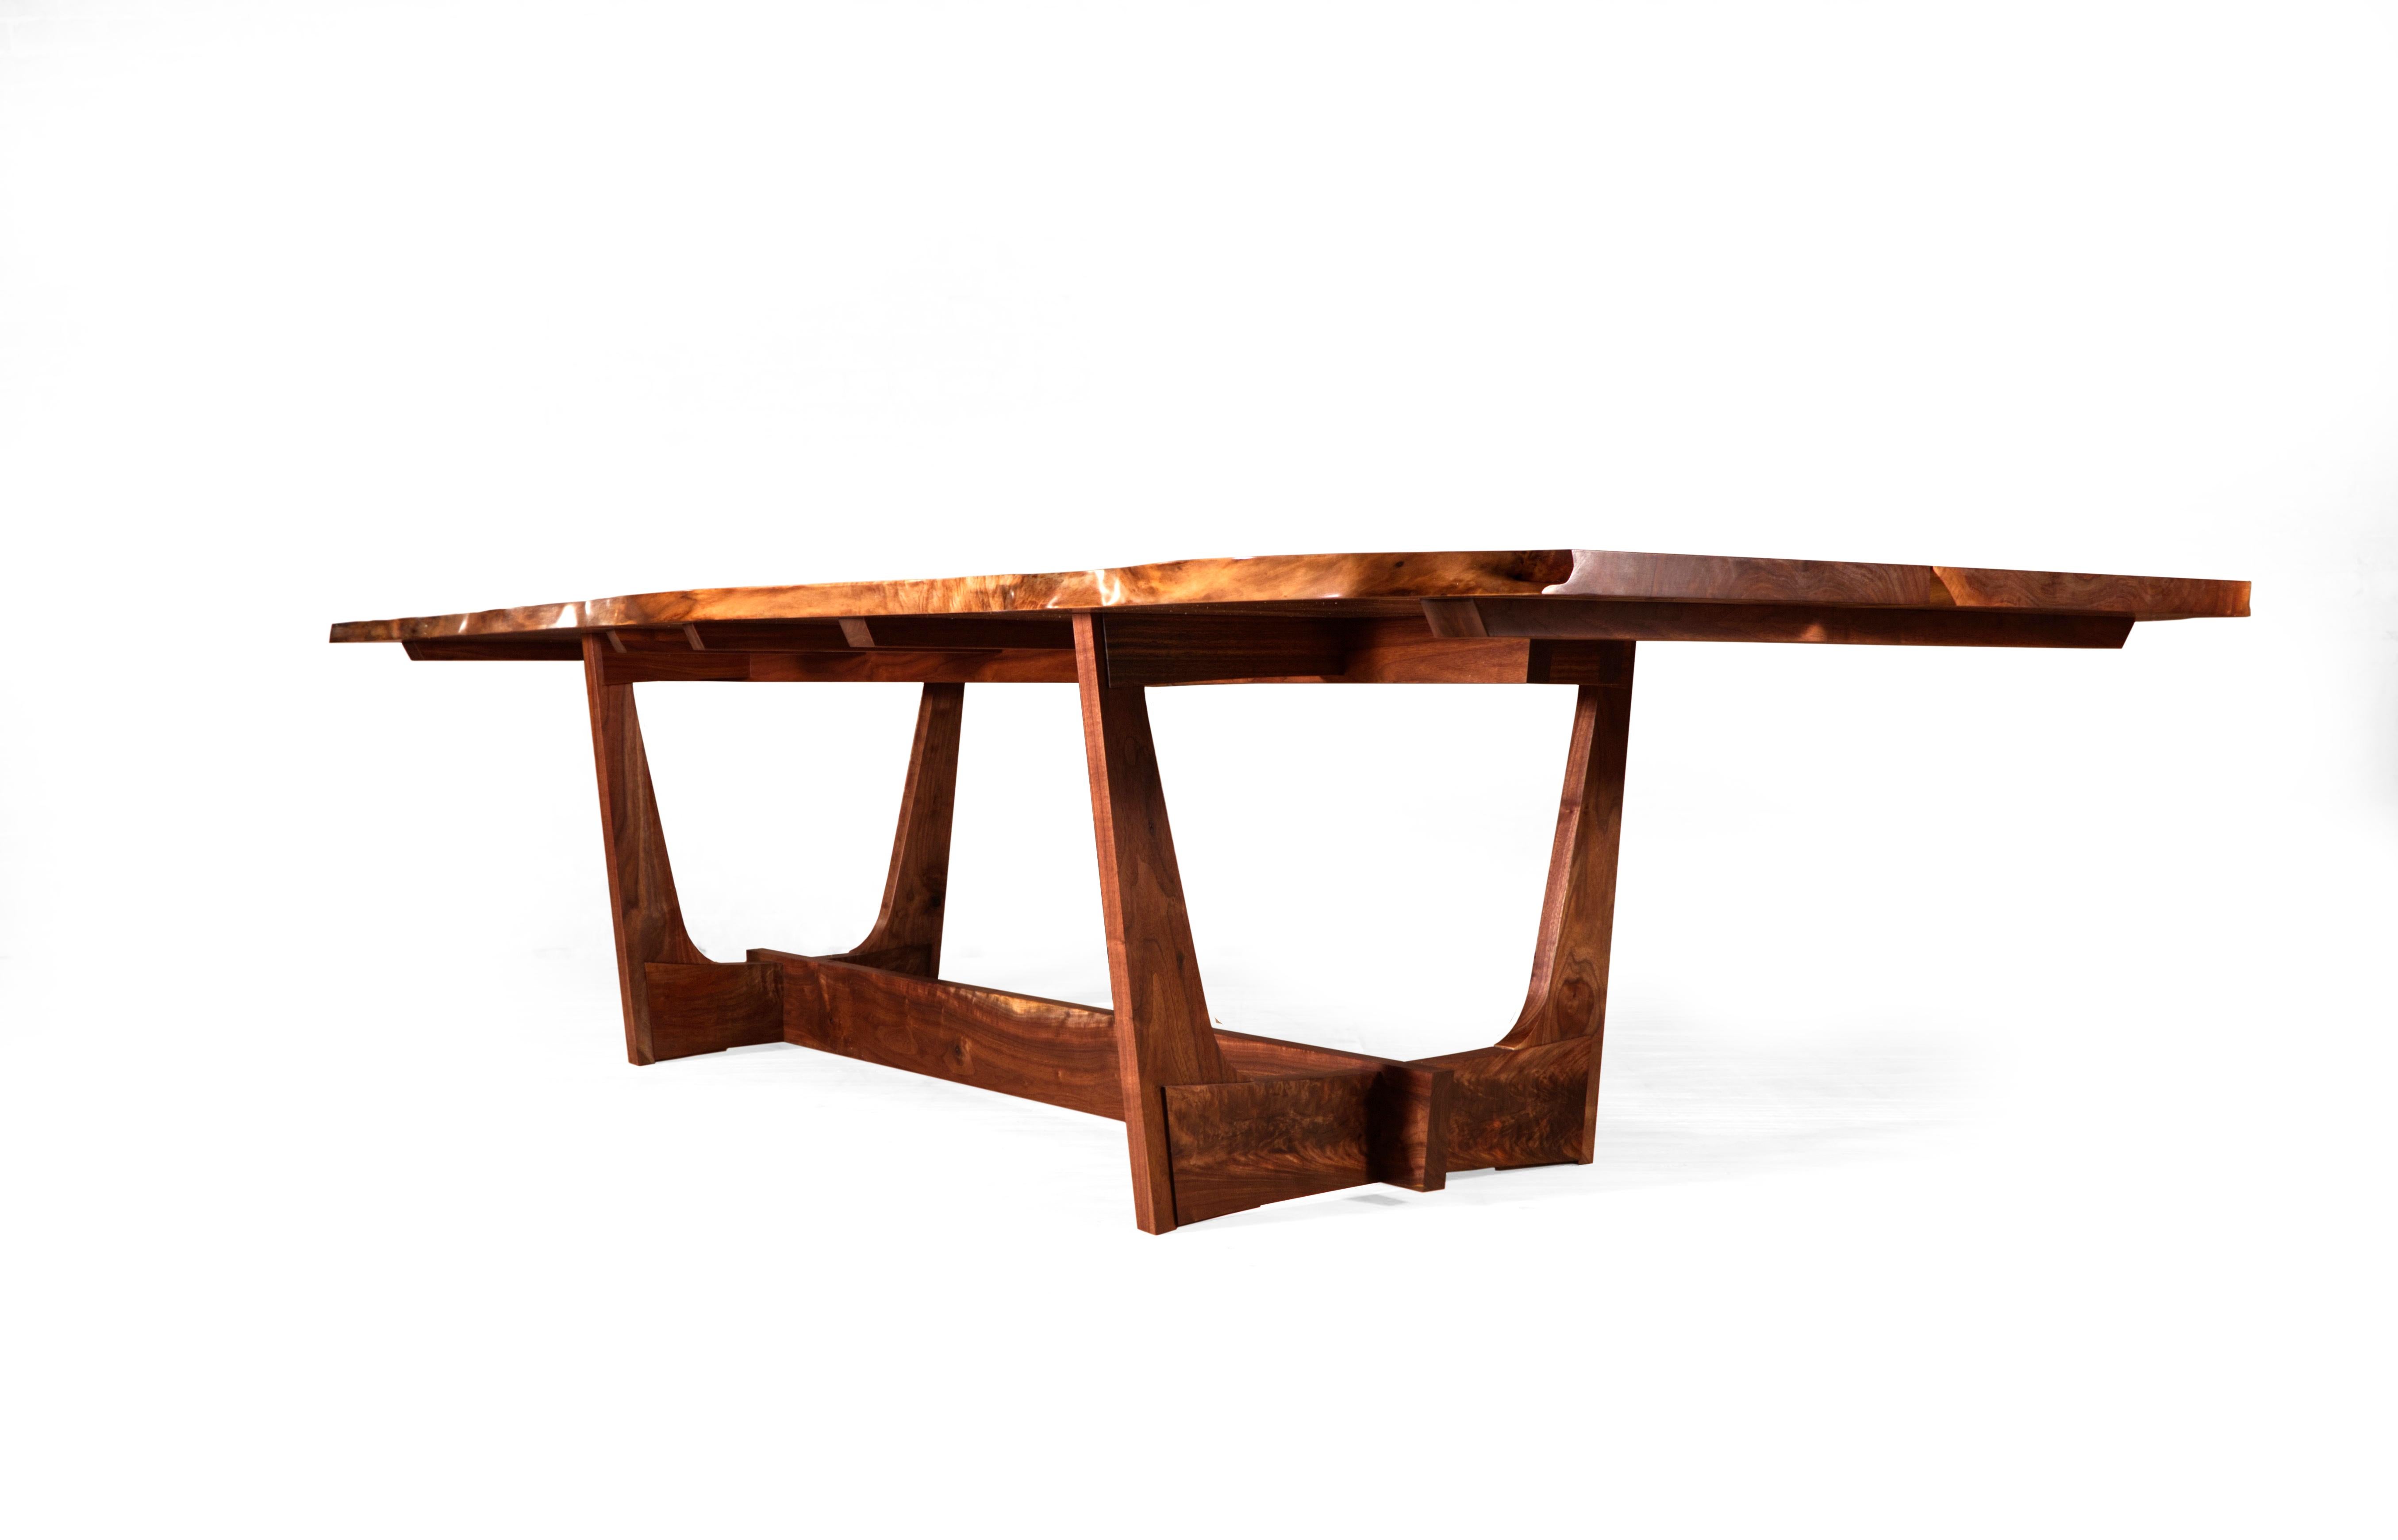 The Lake Tahoe table is a testament to fine Craft. Designed around the principles of handcut joinery, such as large bridle joints and butterfly keys, the table's simple form highlights both the wood selection and skilled craftsmanship. 

The table